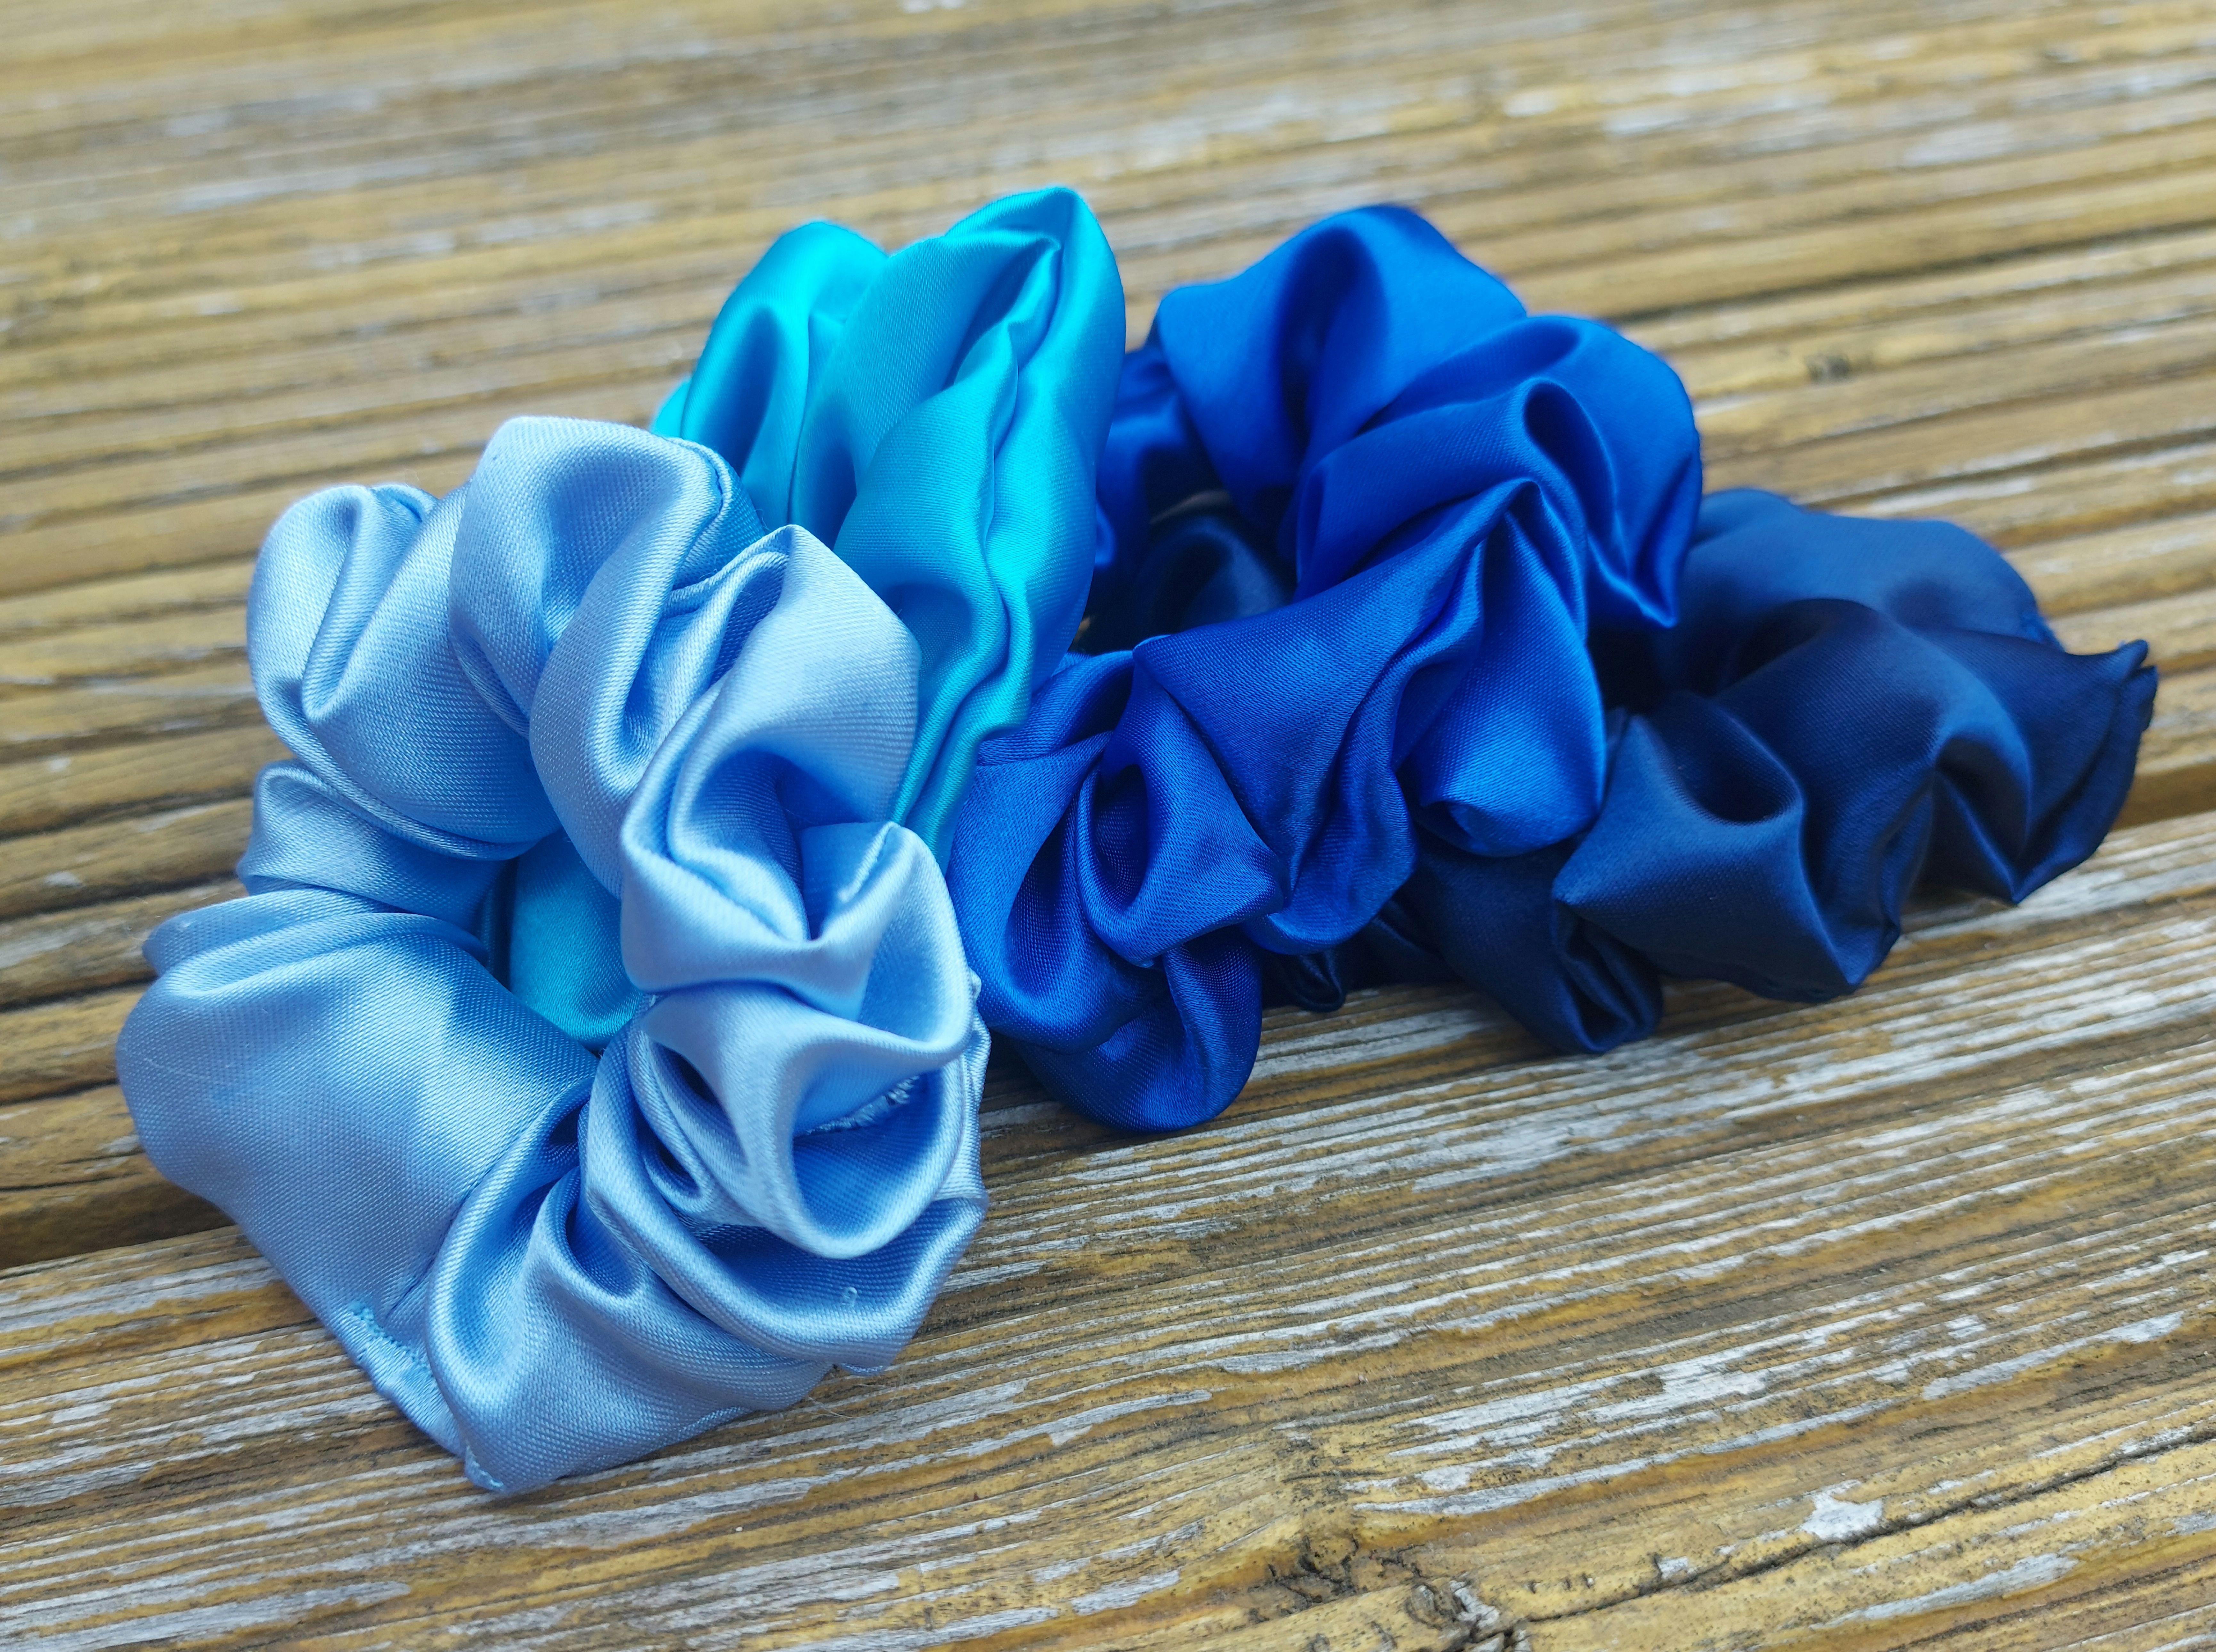 Satin Scrunchies in Turquoise 